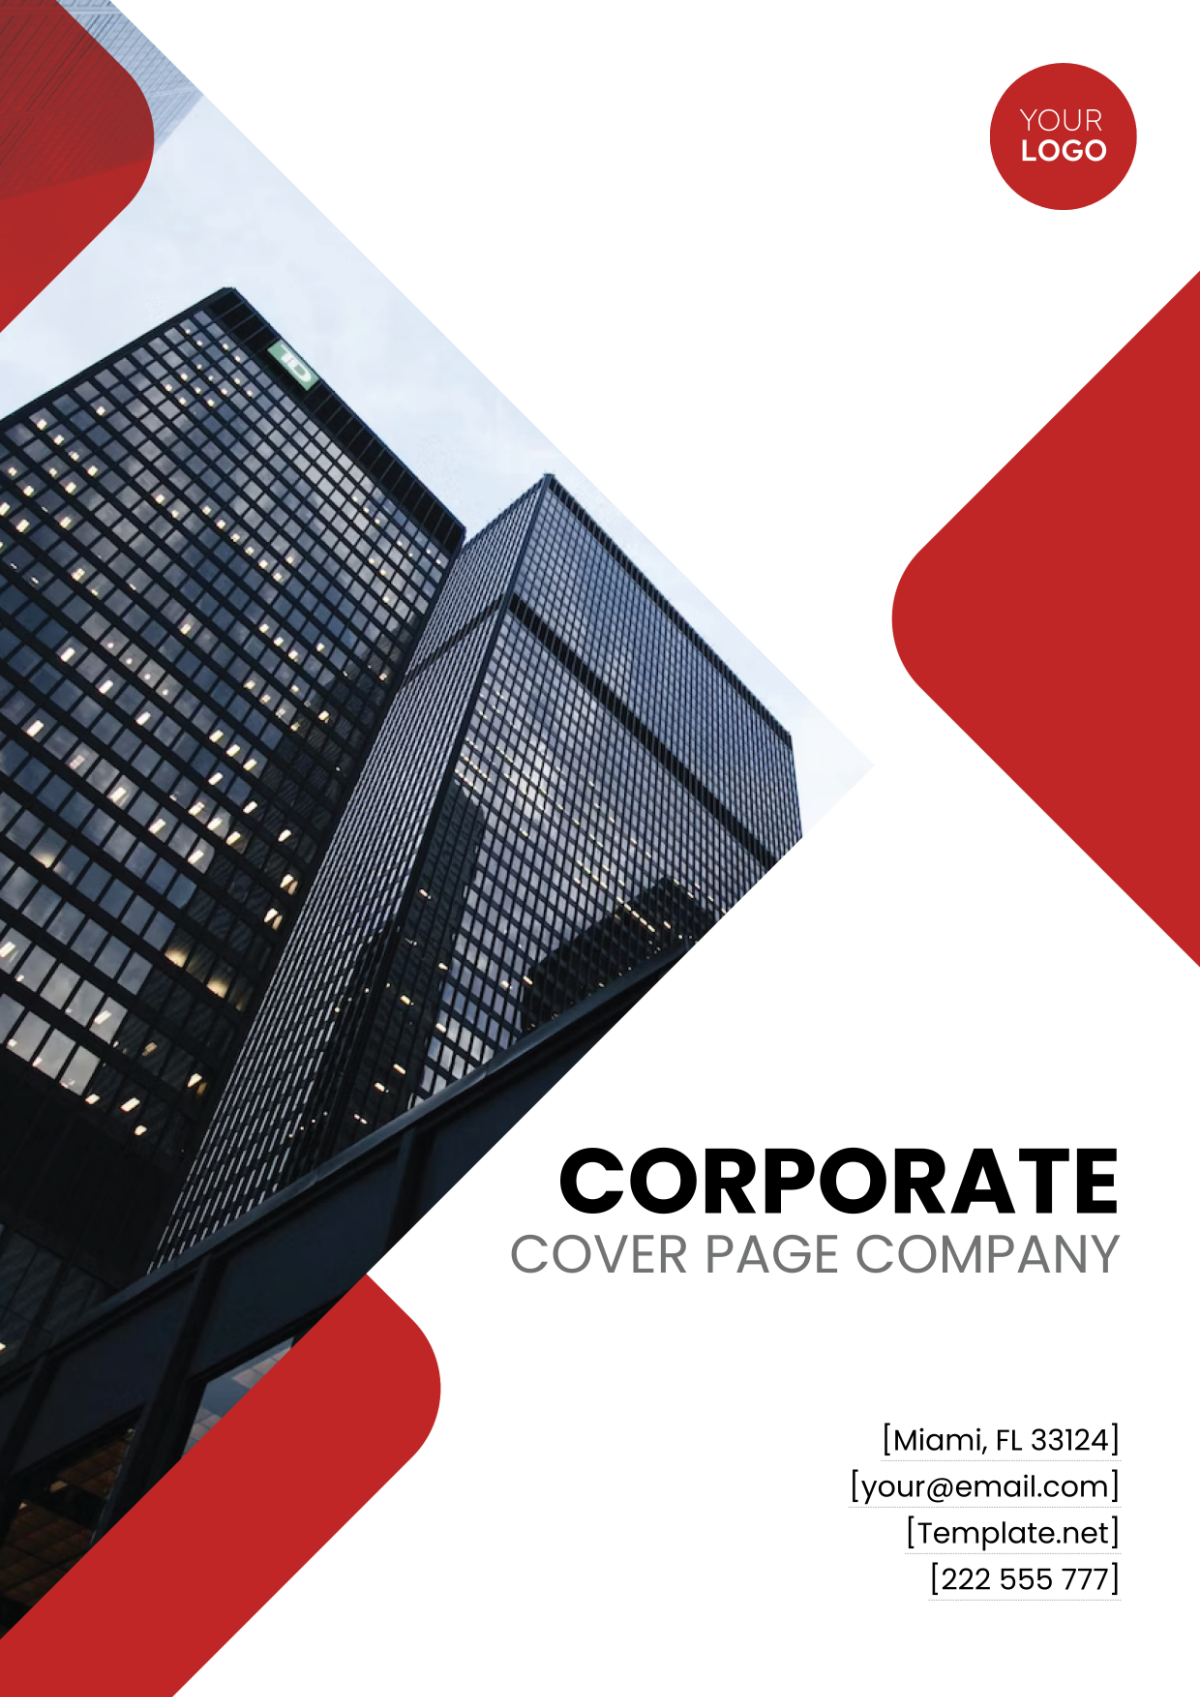 Free Corporate Cover Page Company Template